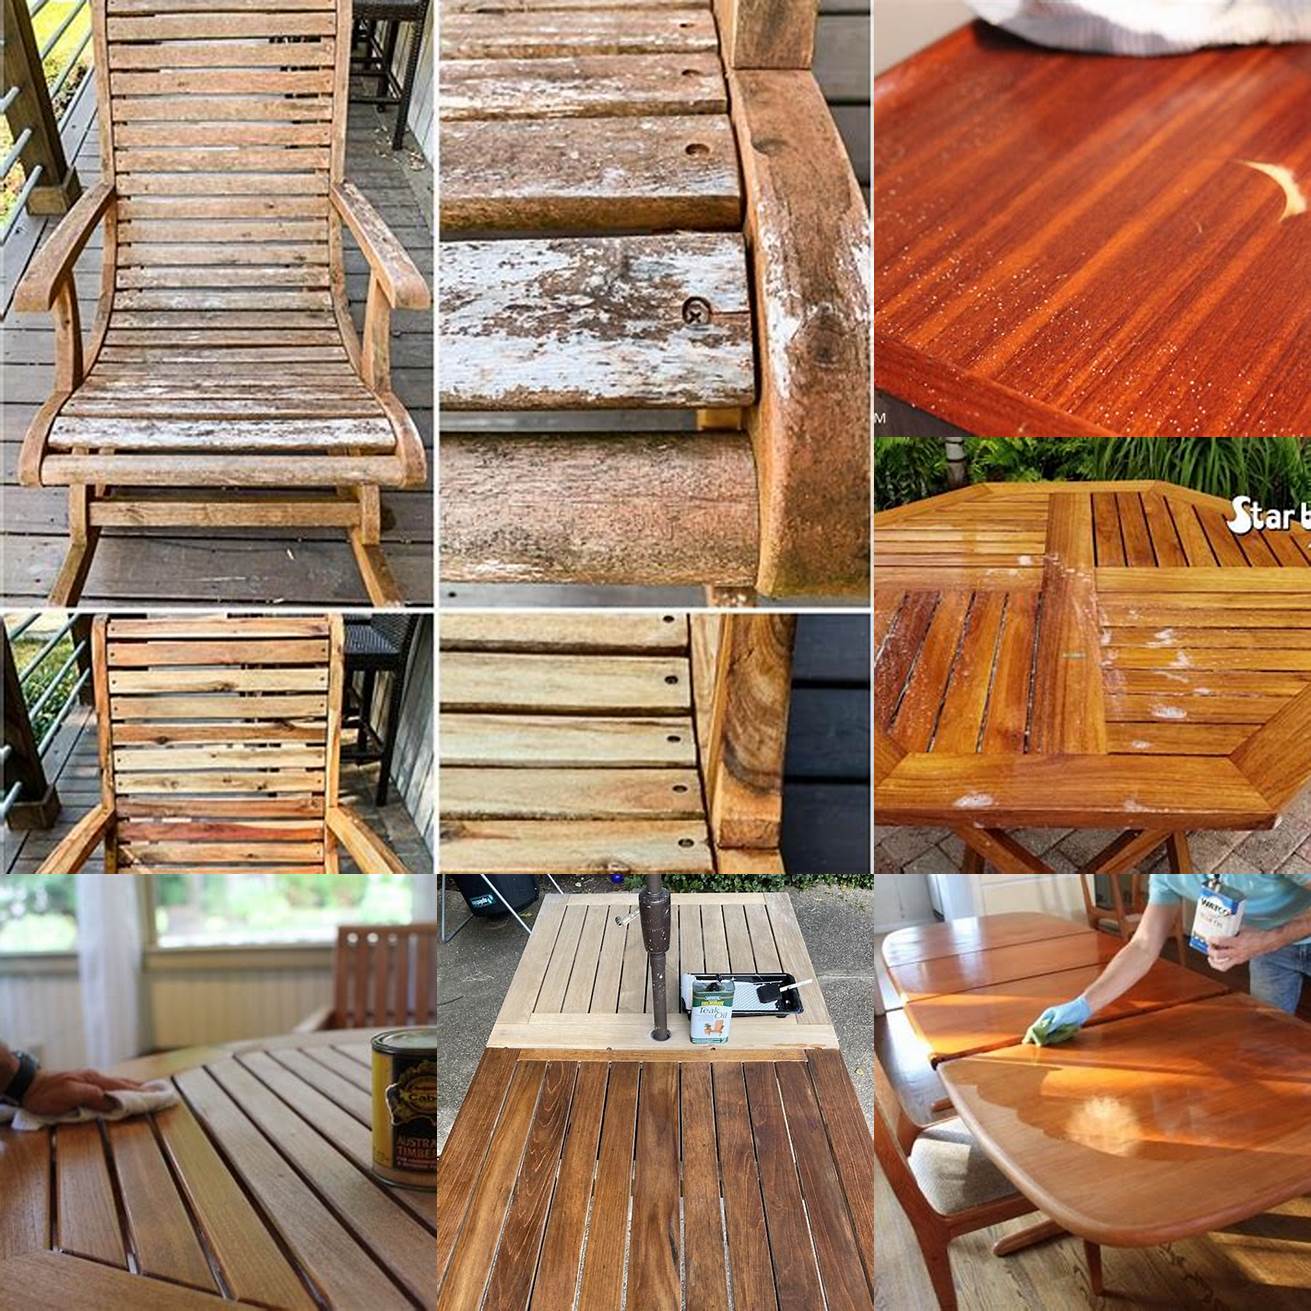 Picture of Teak Furniture After Applying Woodmilk